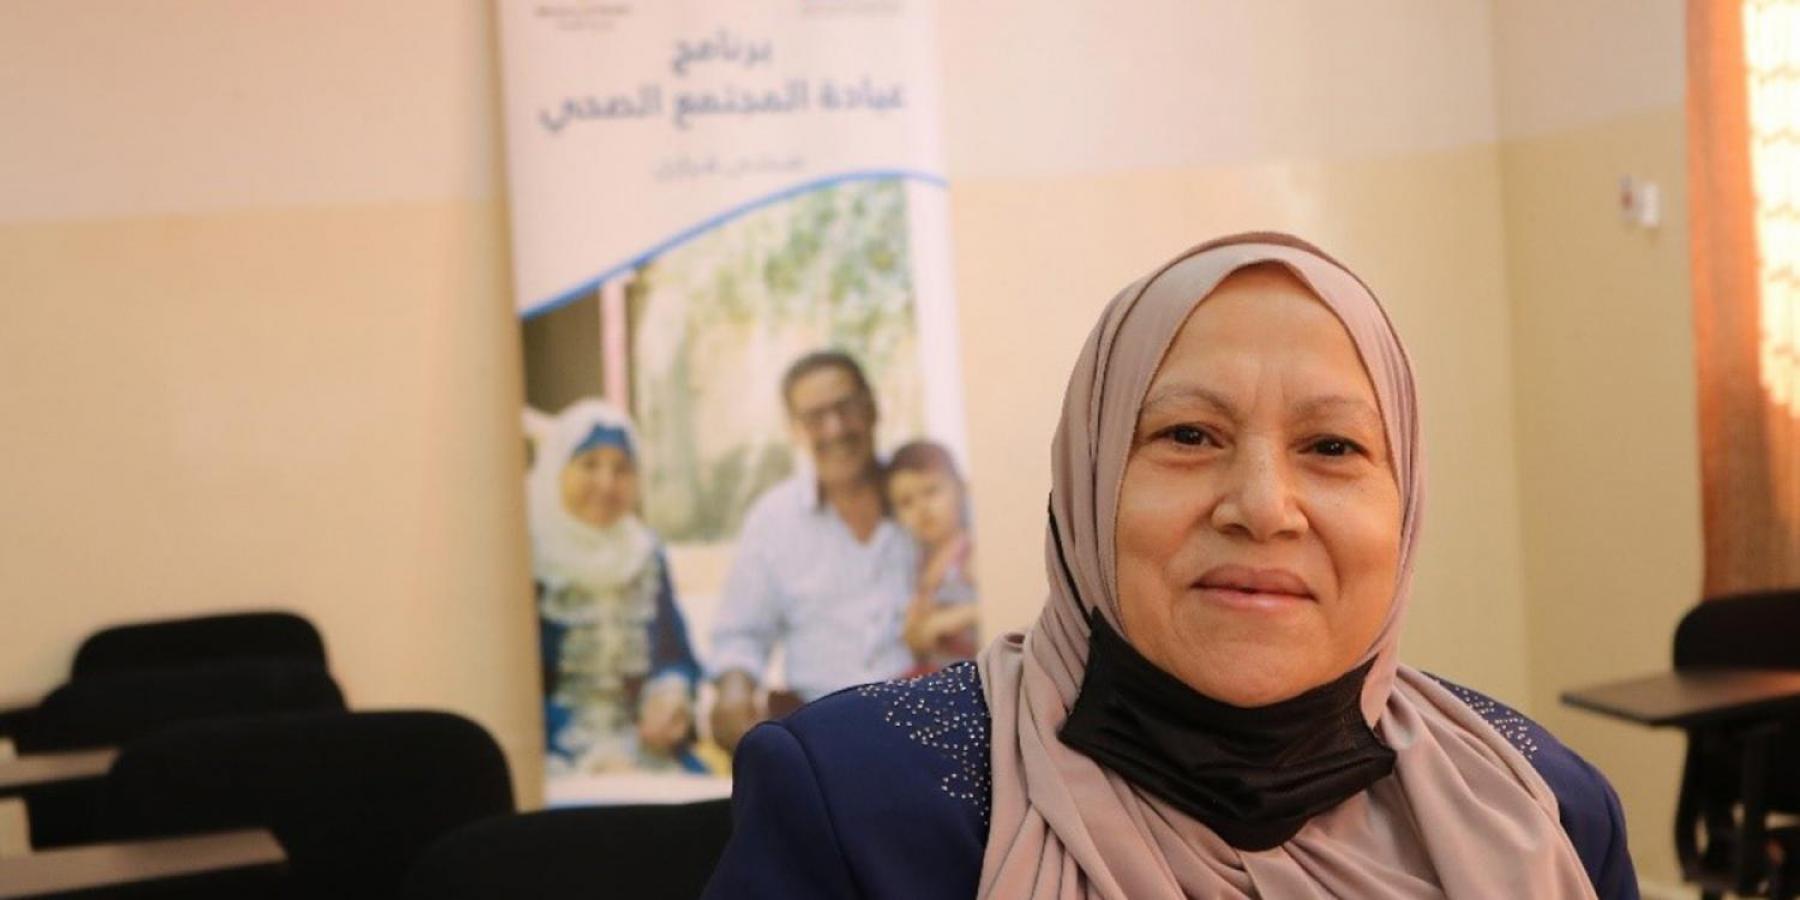 A beneficiary of a UHC programme in Jordan